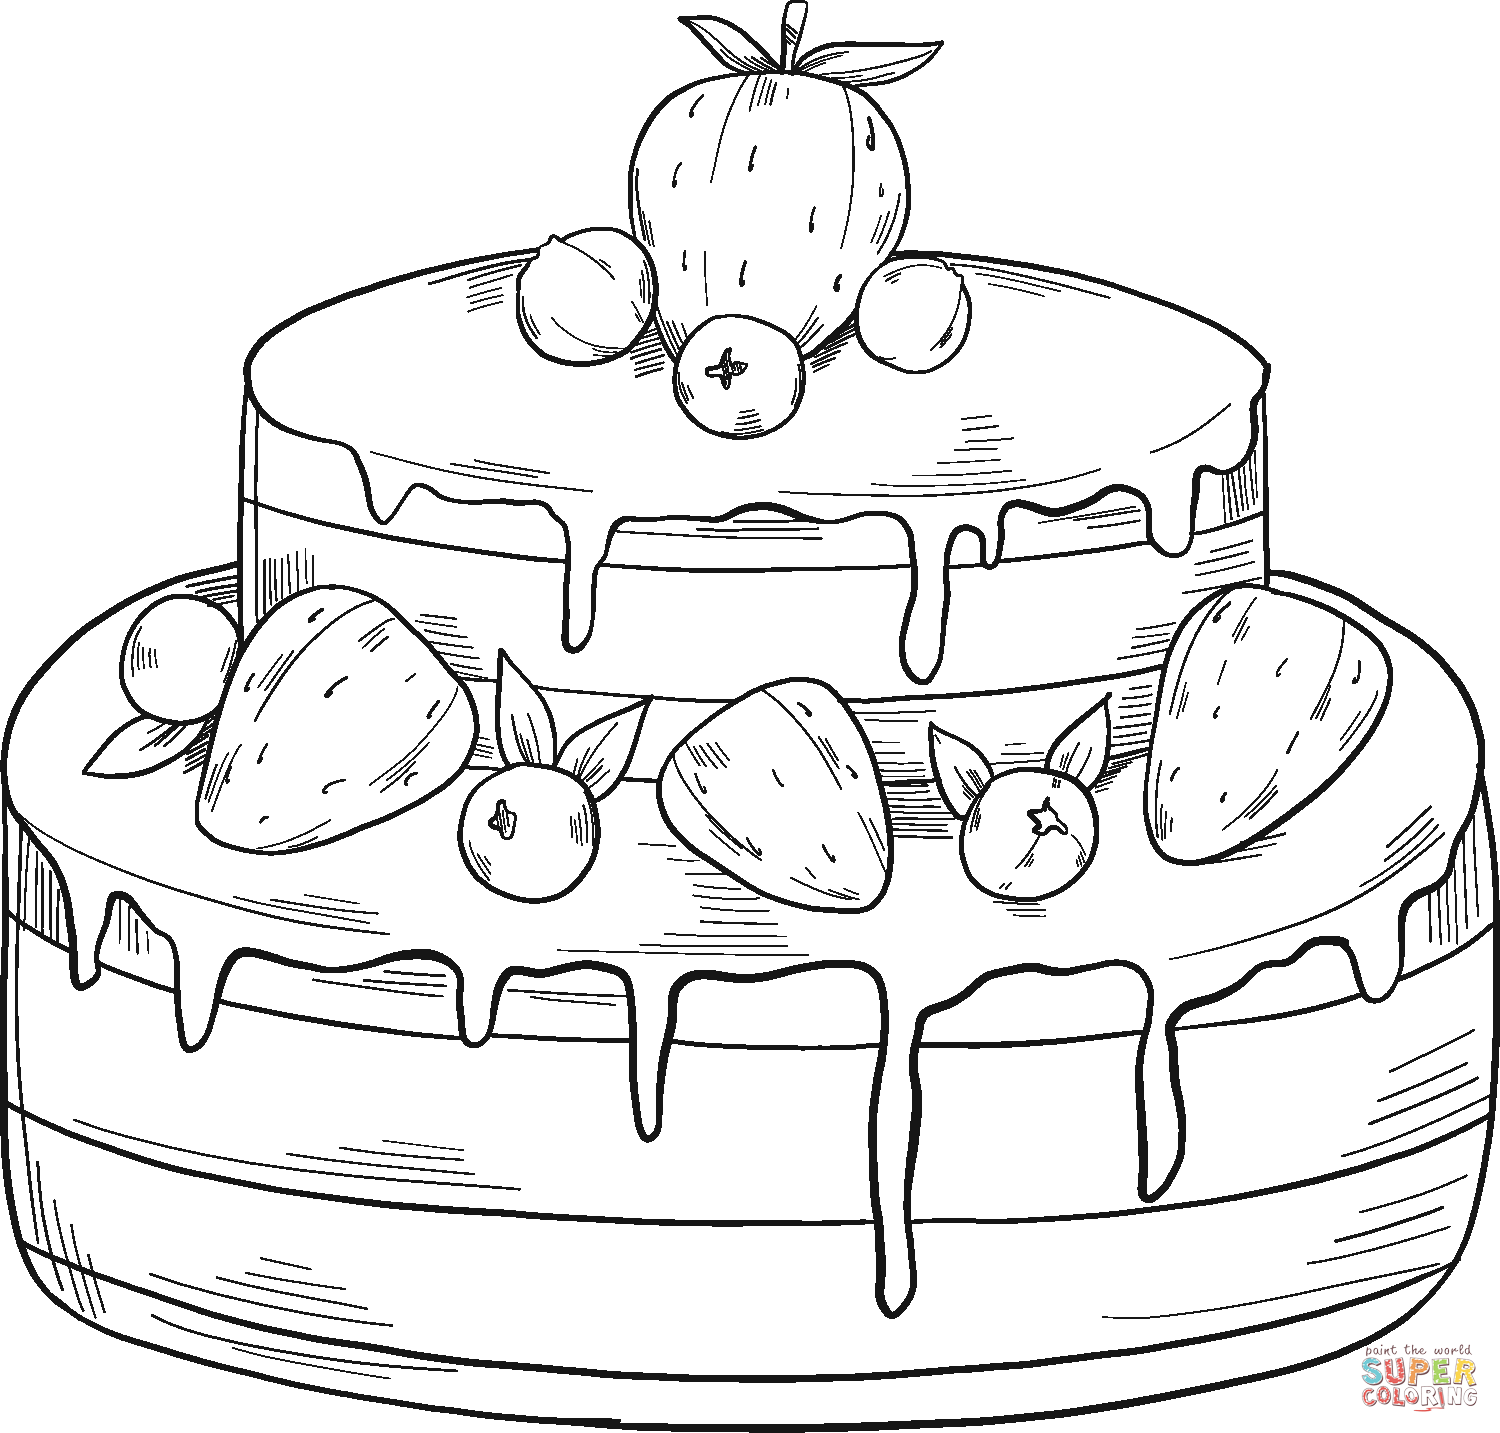 Berry Cake coloring page | Free Printable Coloring Pages